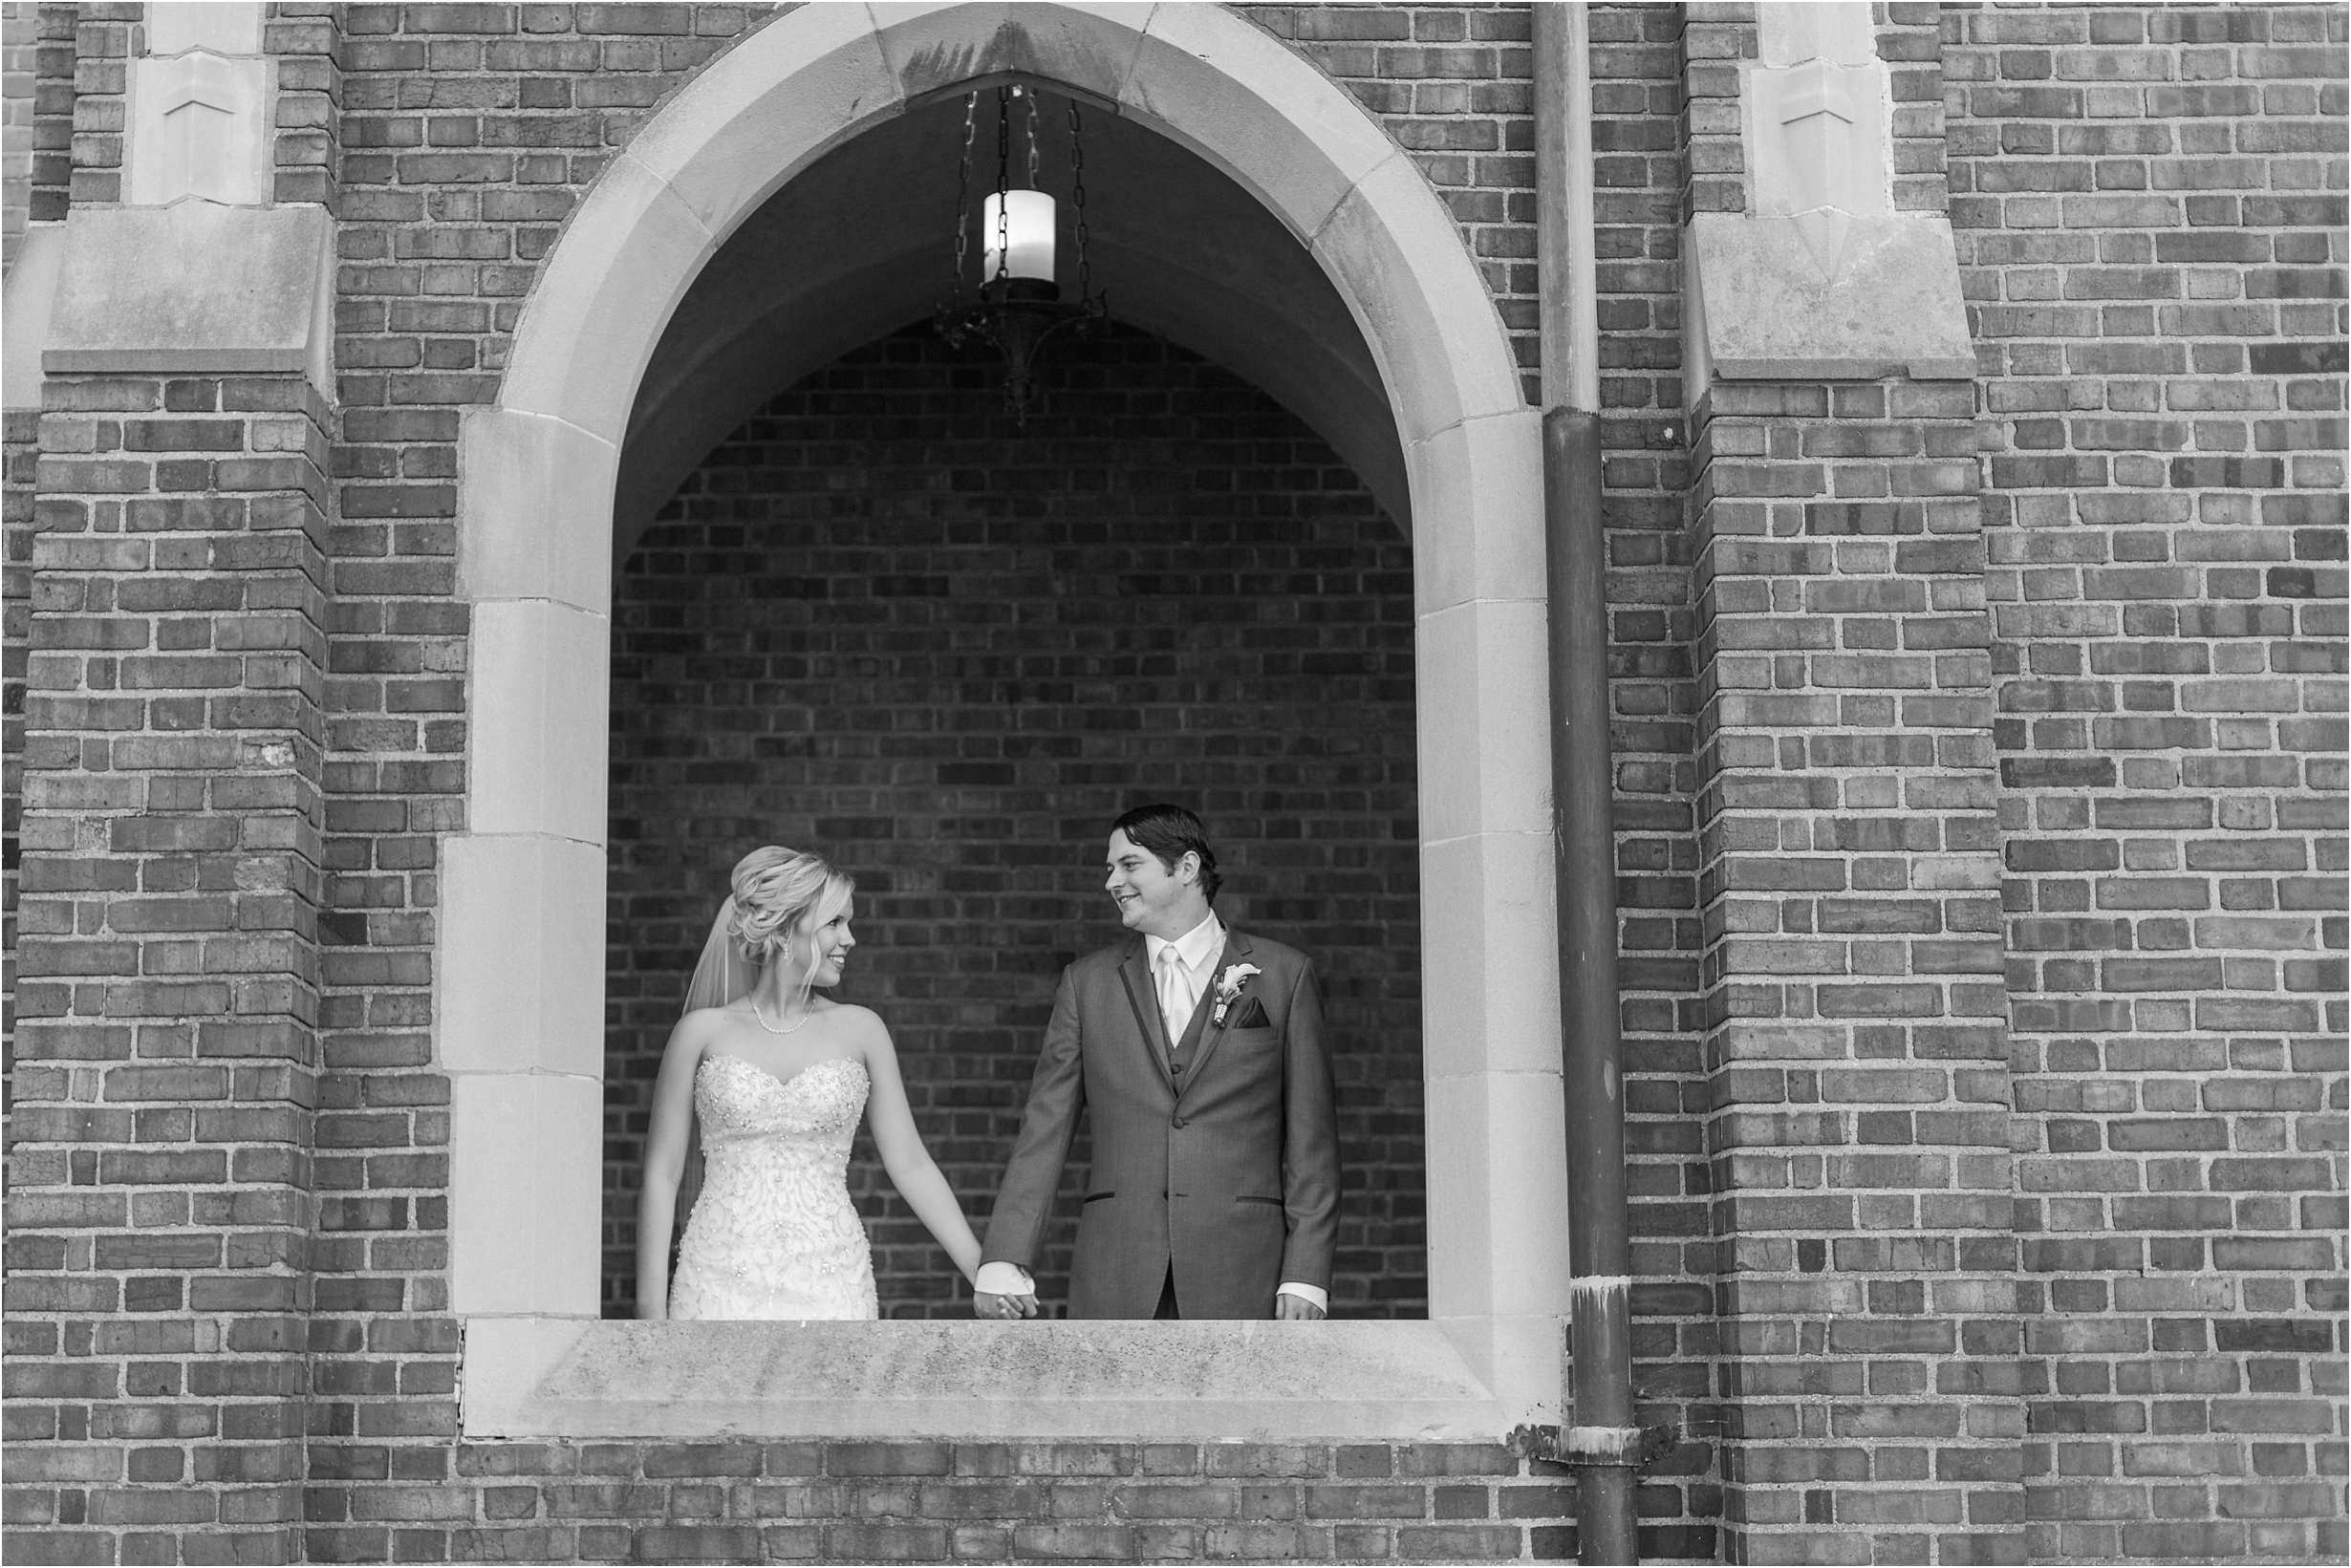 romantic-timeless-candid-wedding-photos-at-grosse-pointe-academy-in-grosse-pointe-mi-by-courtney-carolyn-photography_0011.jpg